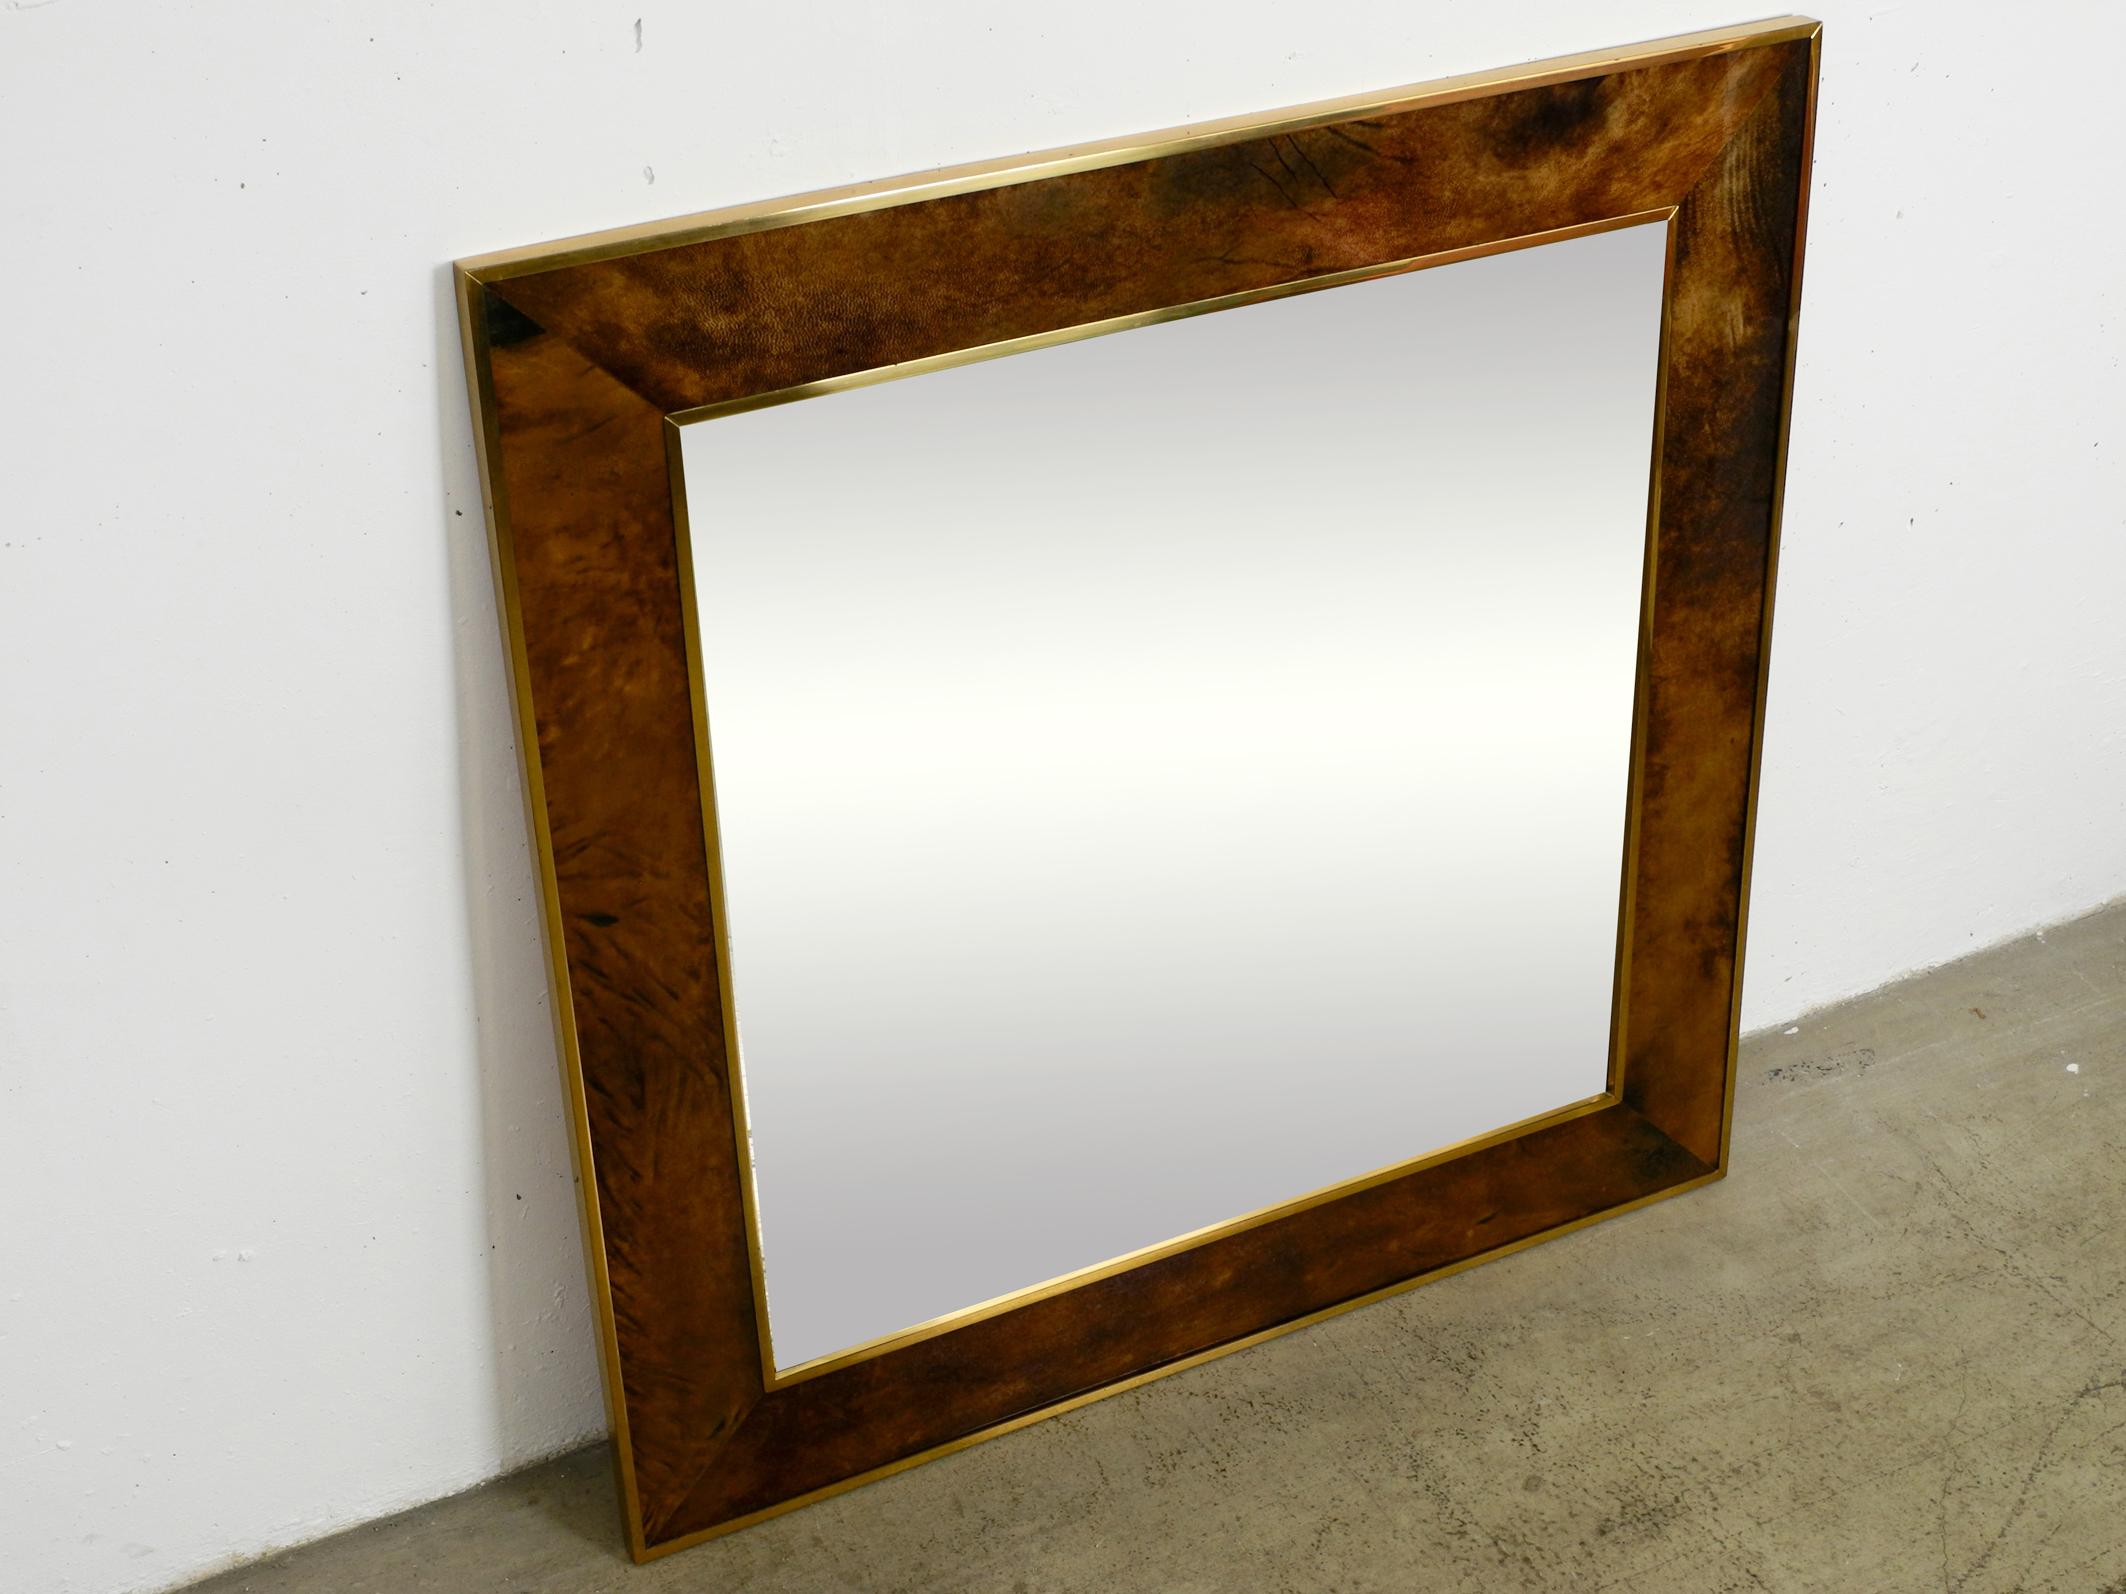 Original extra large 1970s wall mirror by Aldo Tura made of brass and leather.
Great Italian design. Made in Italy. With original label on the back.
Frame is made of brass and goat leather coated with transparent lacquer.
Back is made of